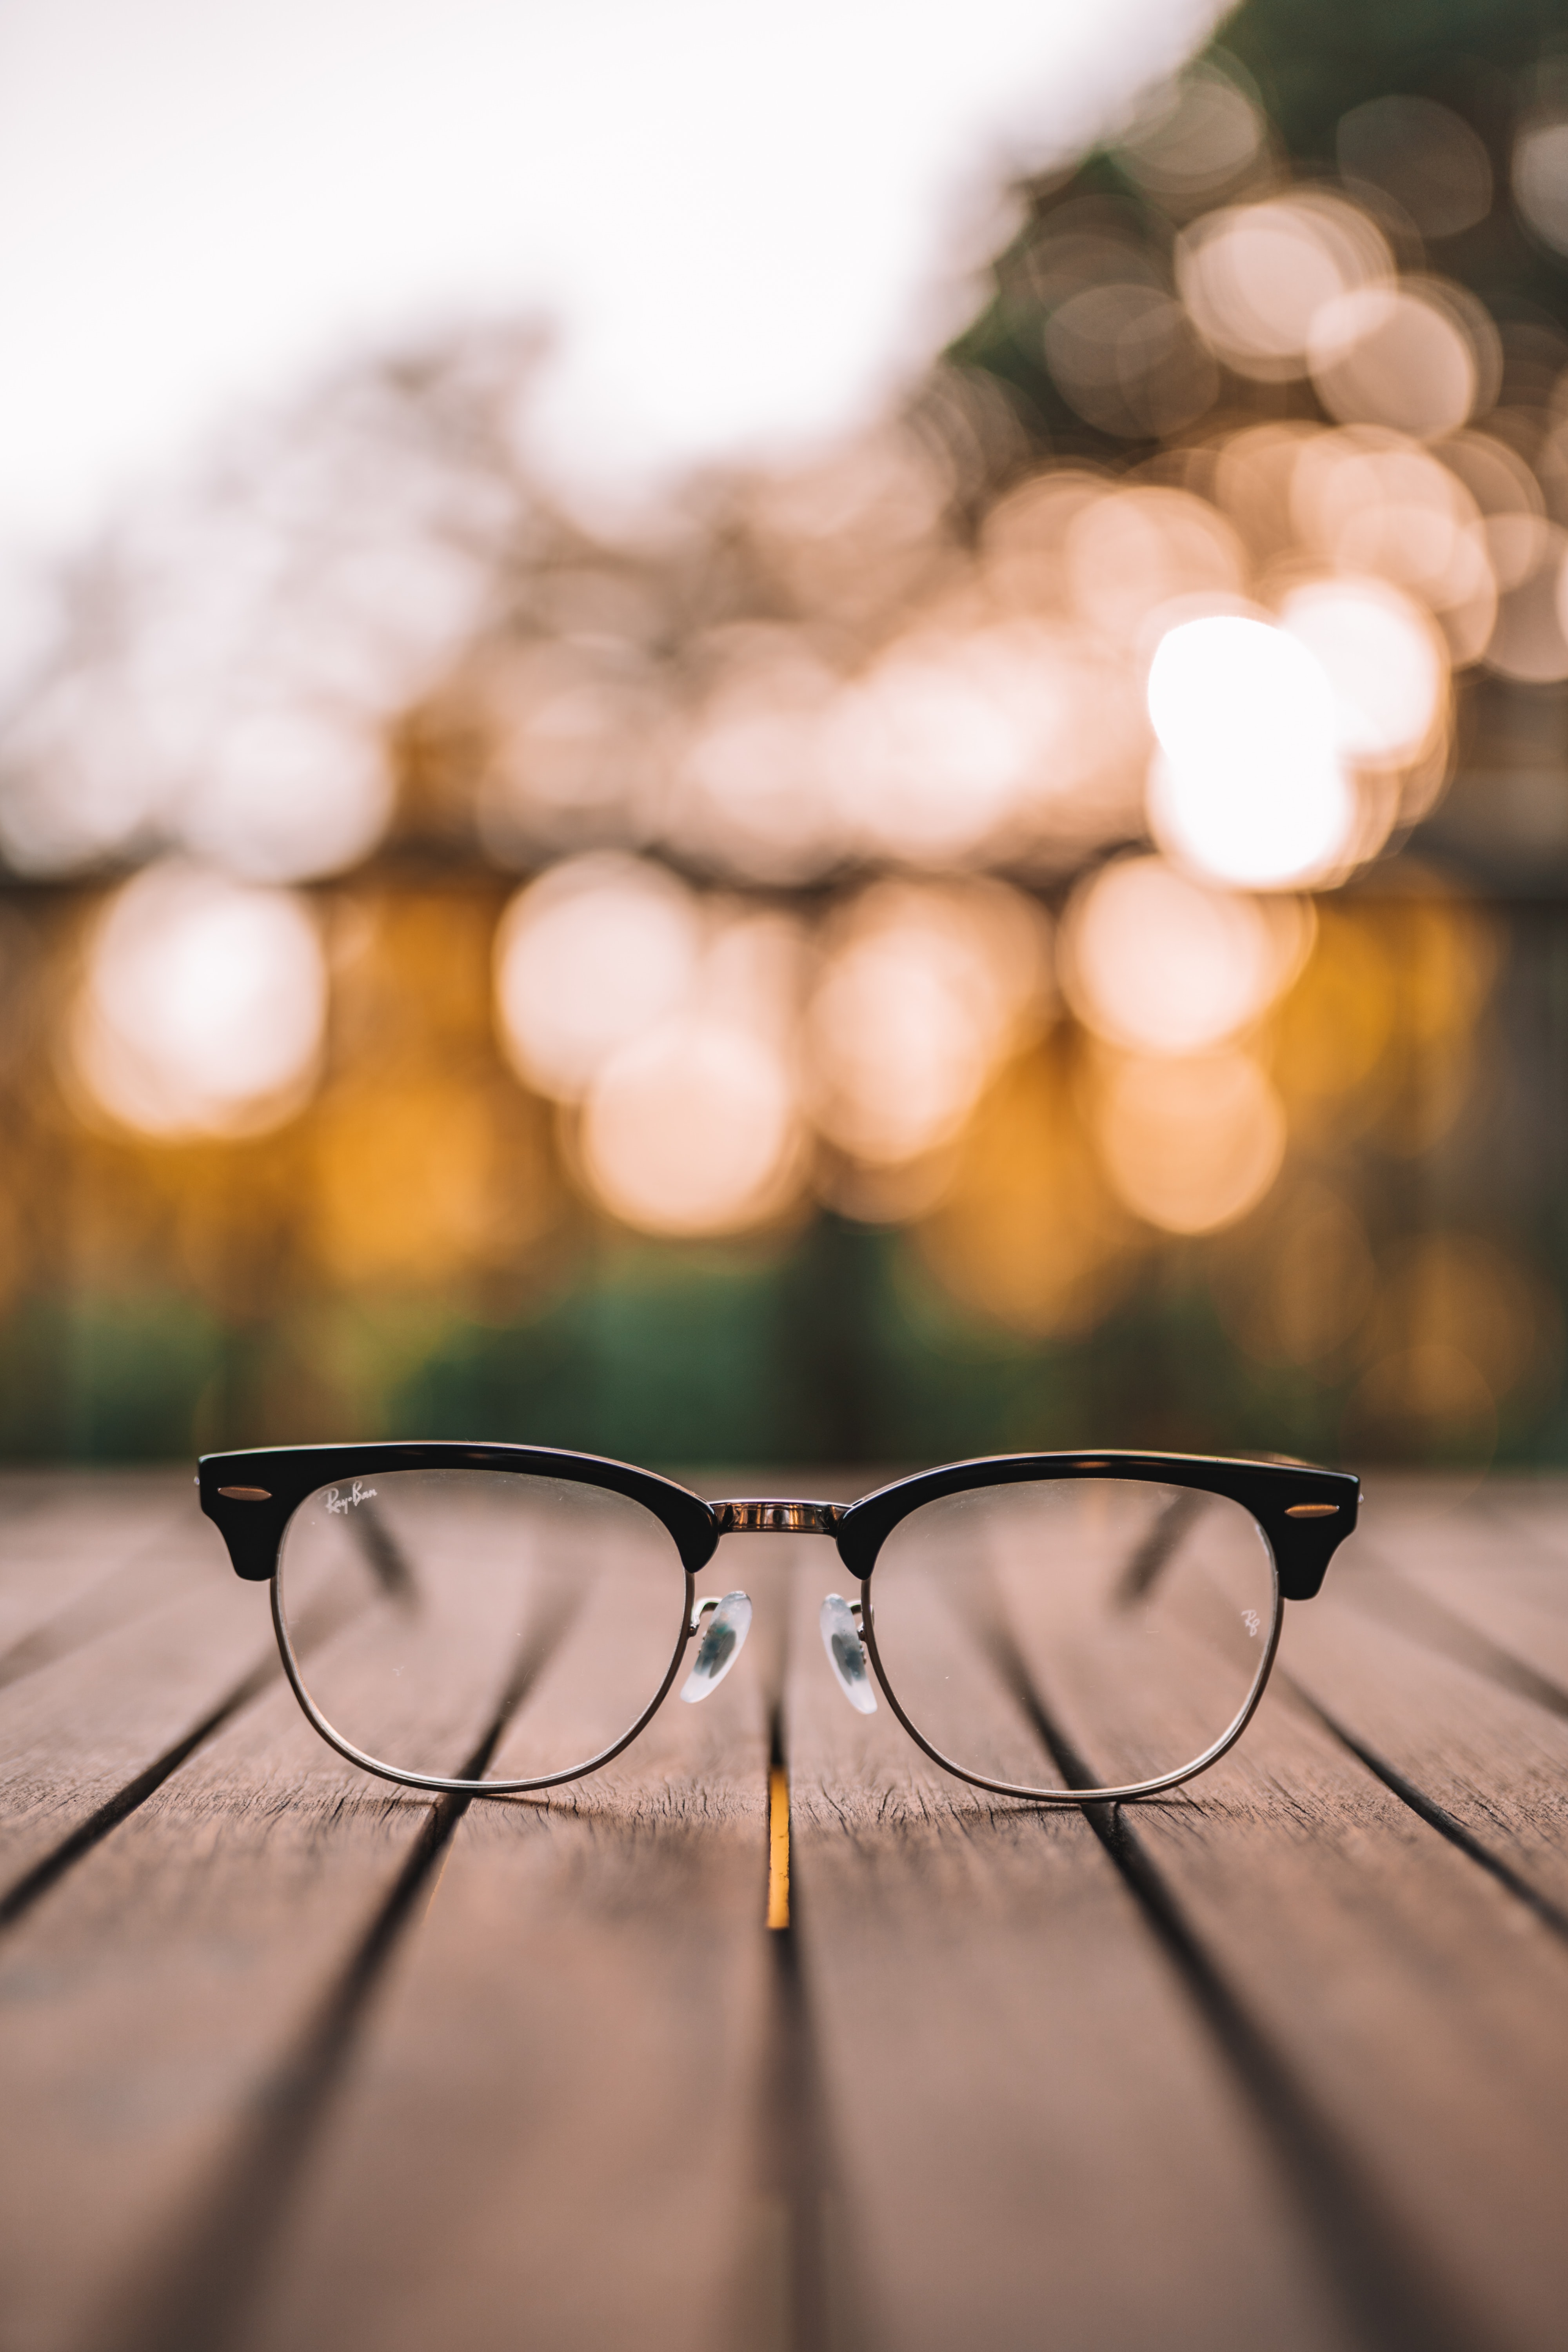 miscellanea, miscellaneous, wood, wooden, blur, smooth, lenses, planks, board, glasses, spectacles lock screen backgrounds